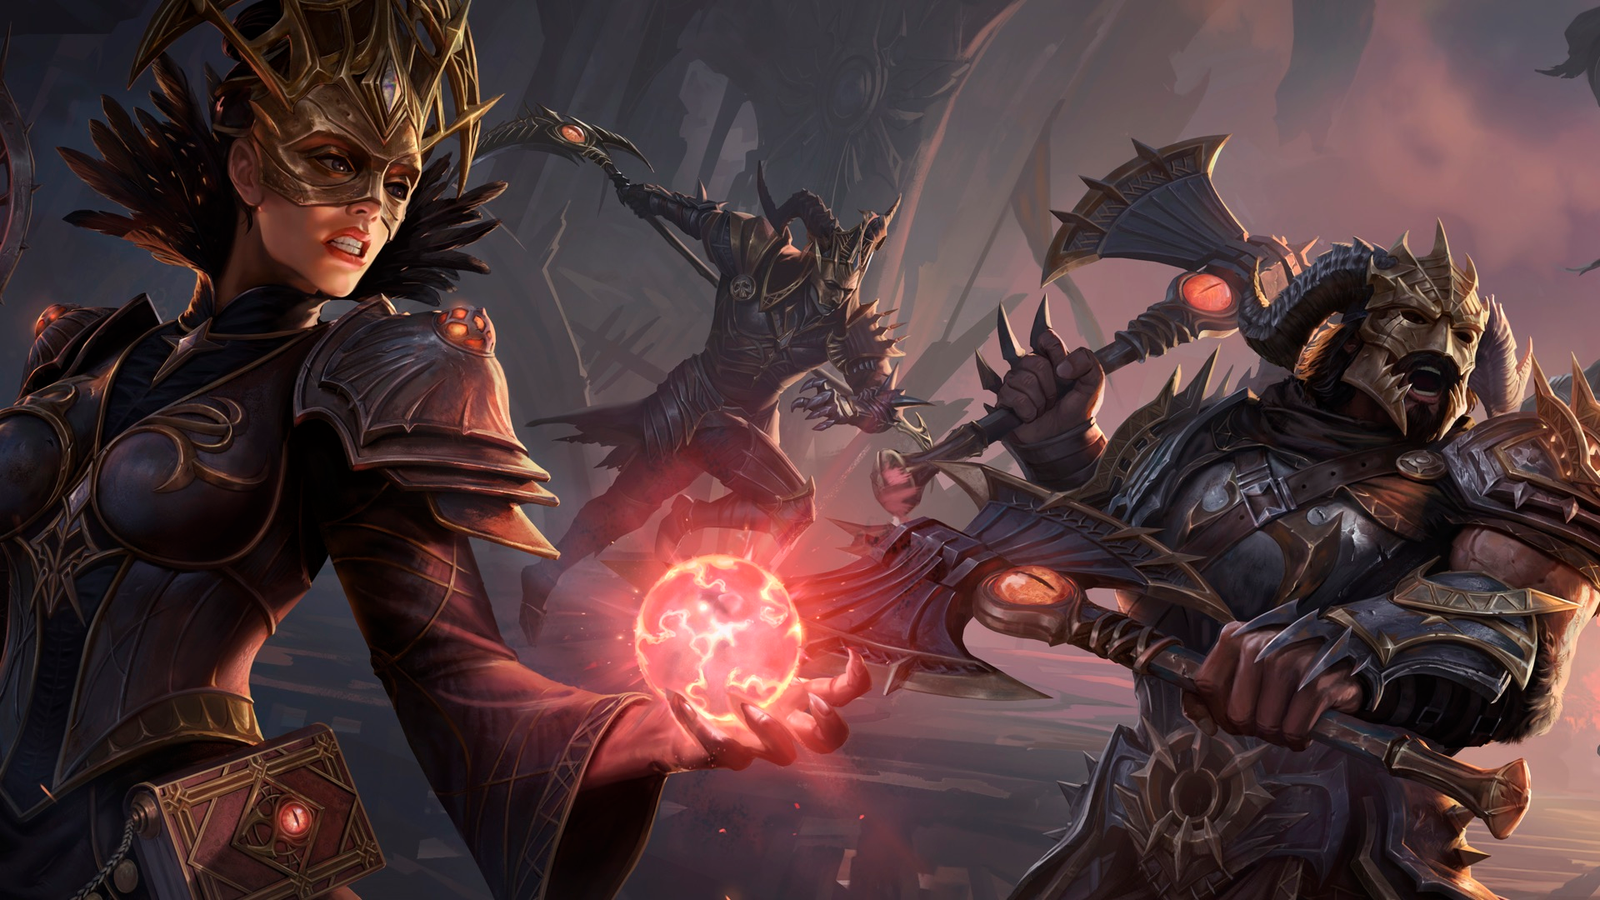 Diablo Immortal Players Will Be Able To Change Classes Starting